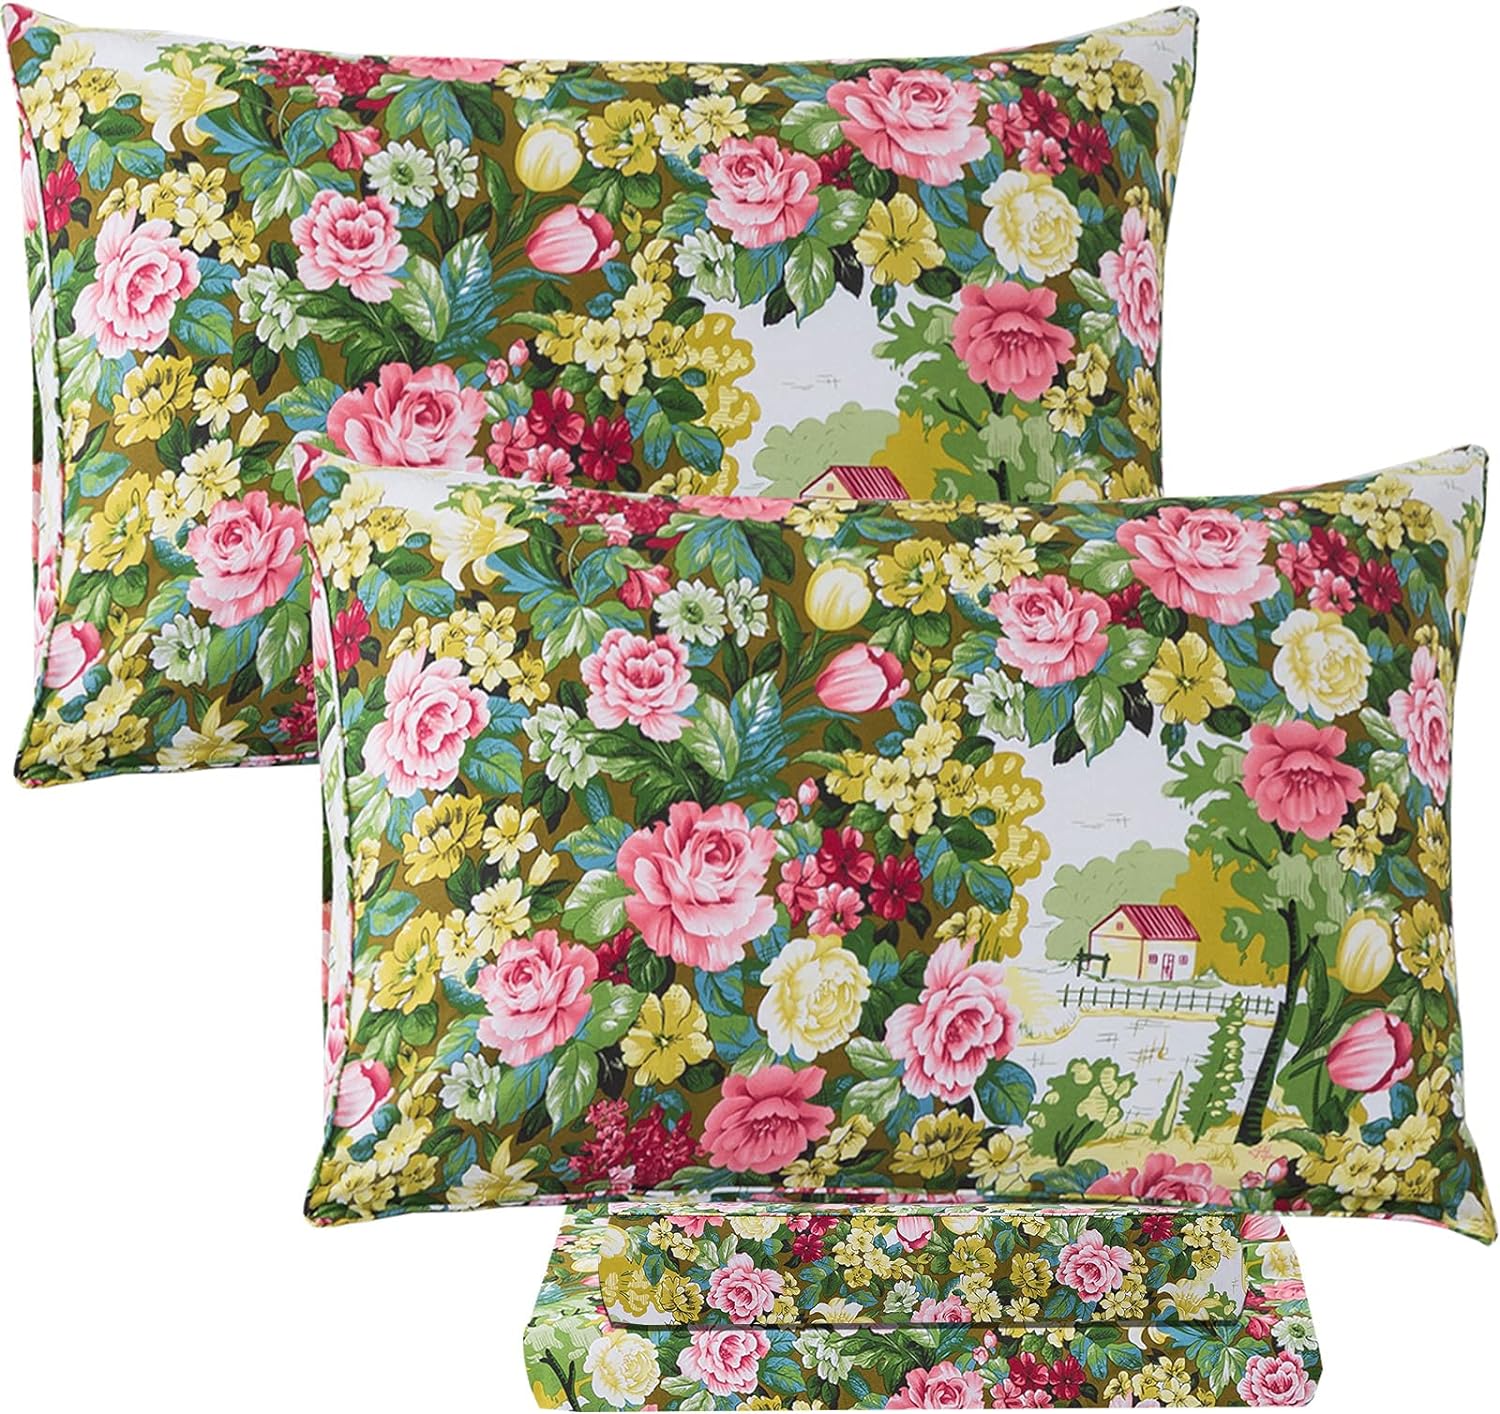 FADFAY Shabby Floral Sheet Set Queen Size 100% Cotton Soft Vintage Garden Flower Green Bed Sheet Anti-Fade Elegant Pink Peony Rose Cottage Printed Deep Pocket Sheet 17.5 inch 4 Piece